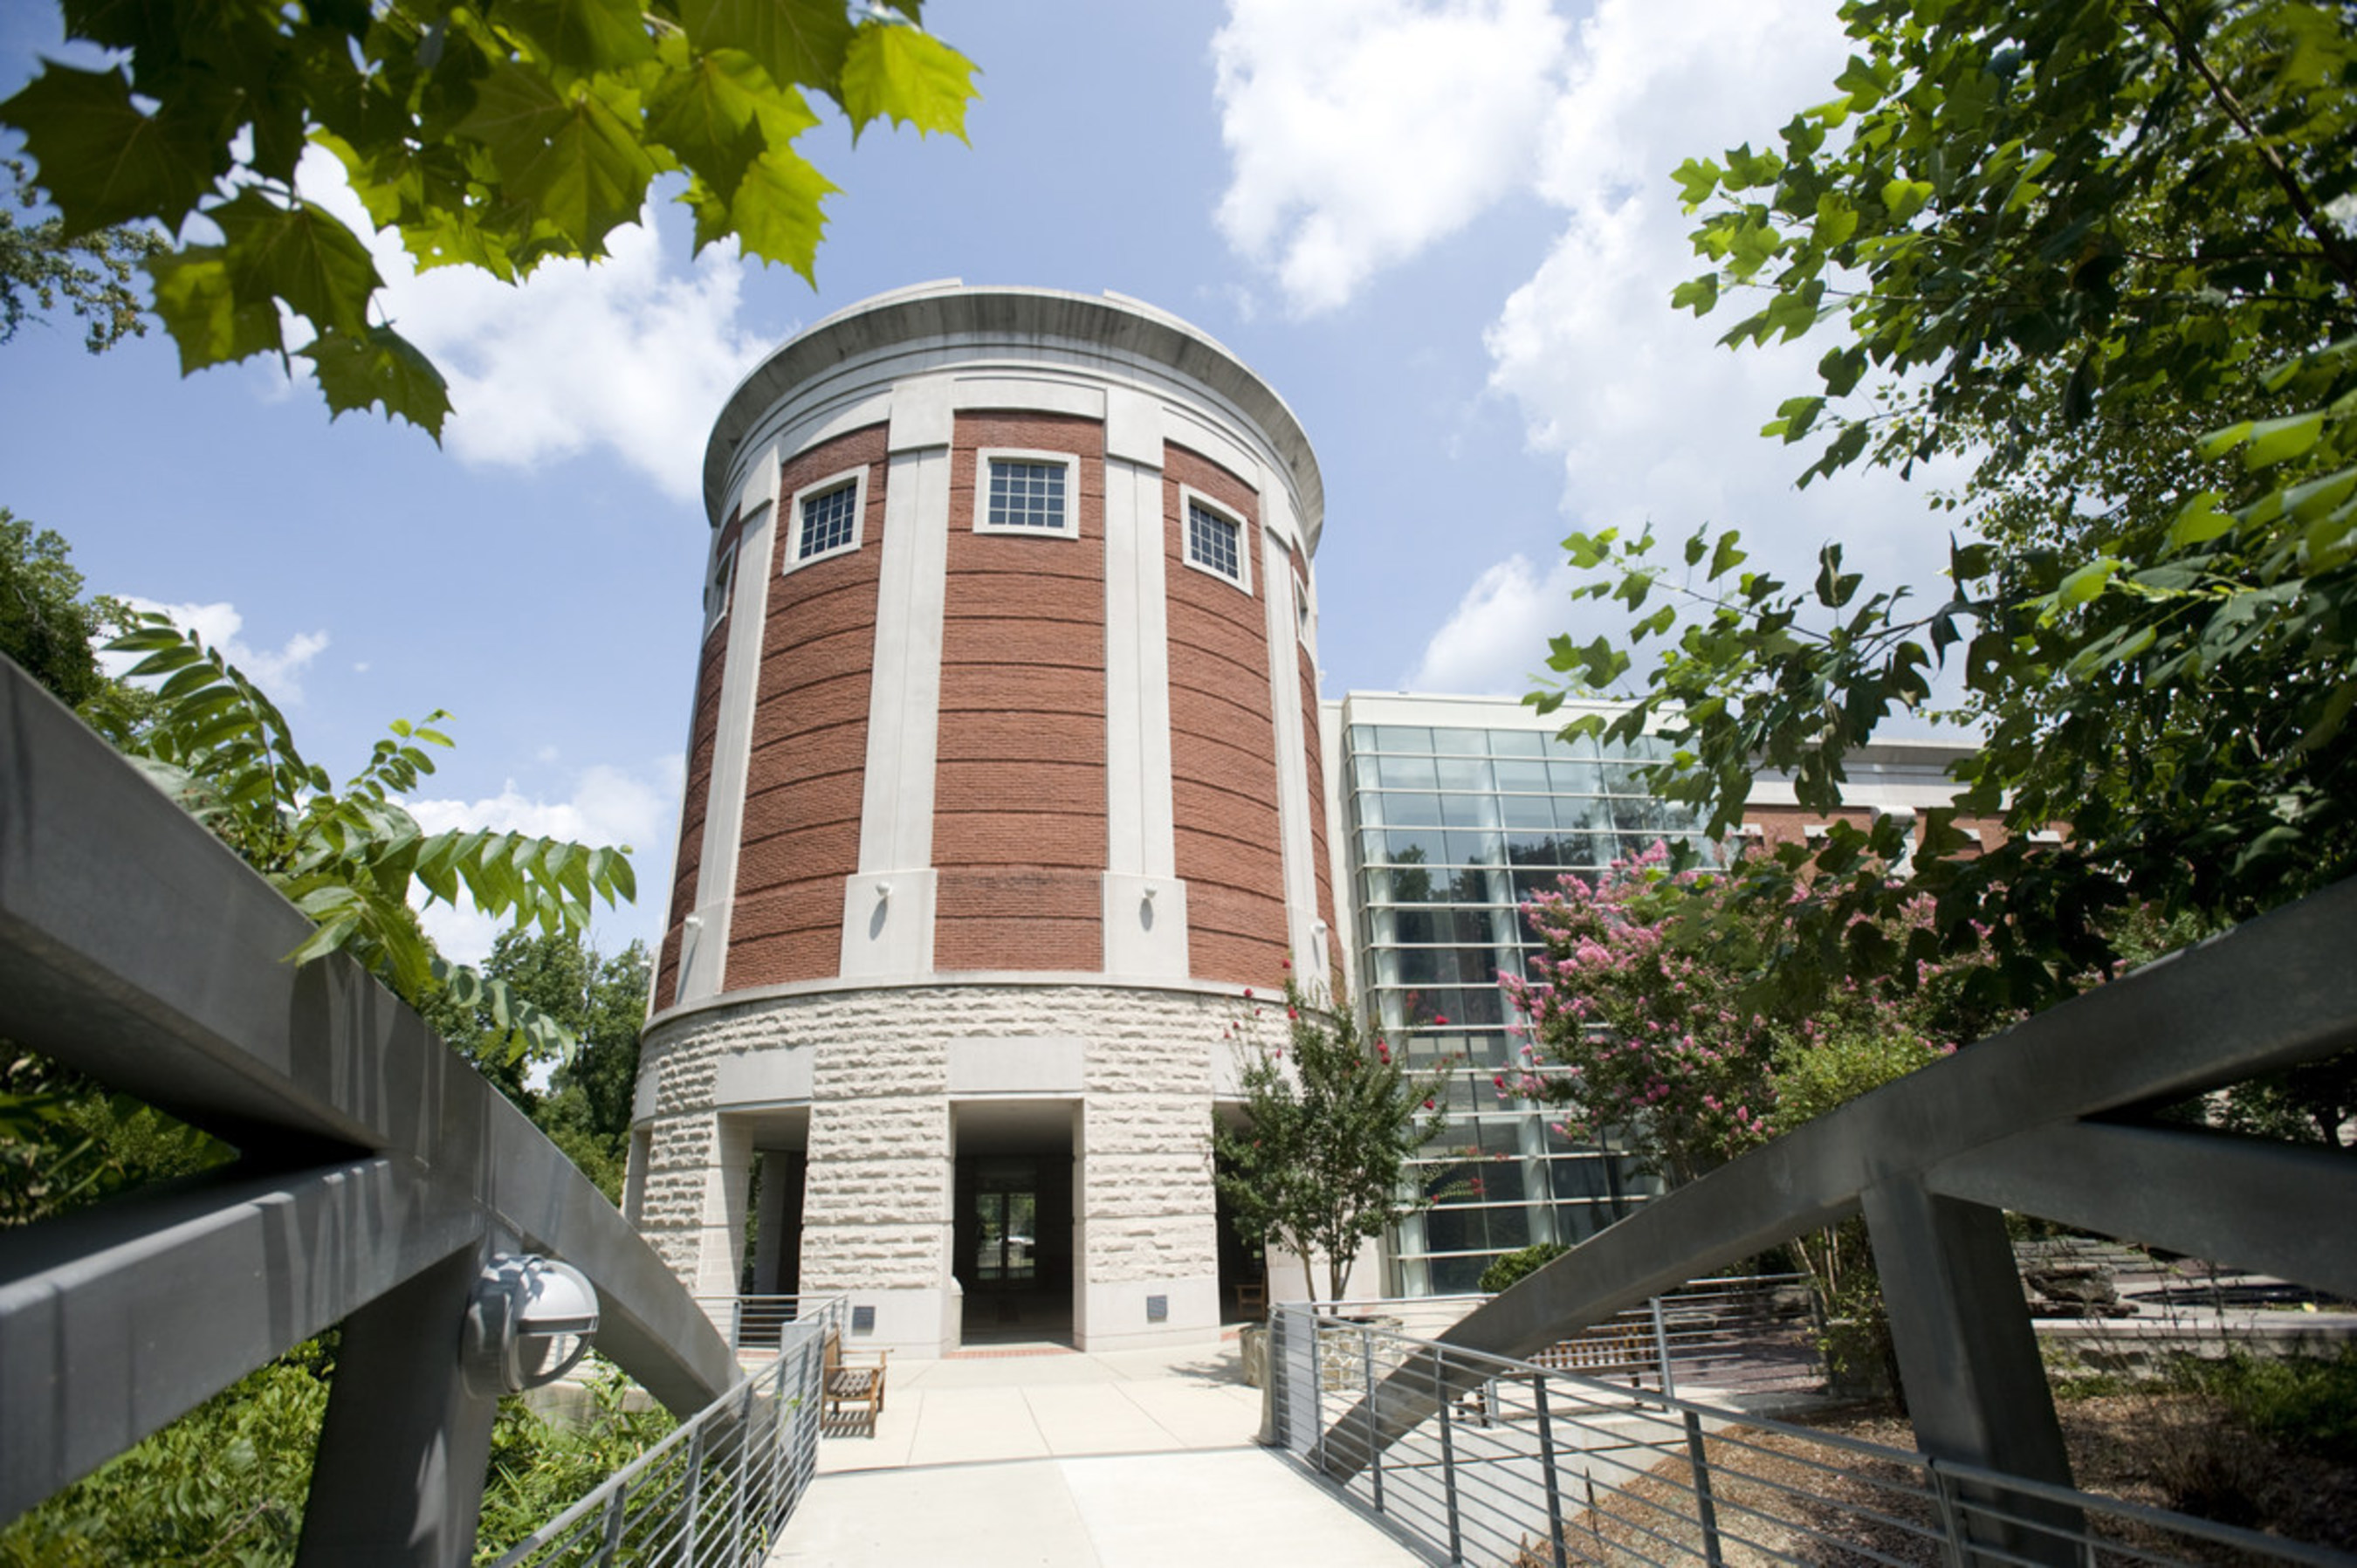 The UNCG School of Music, Theatre and Dance is the largest and most comprehensive collegiate performing arts program in North Carolina and one of the largest in the southeast and the country.